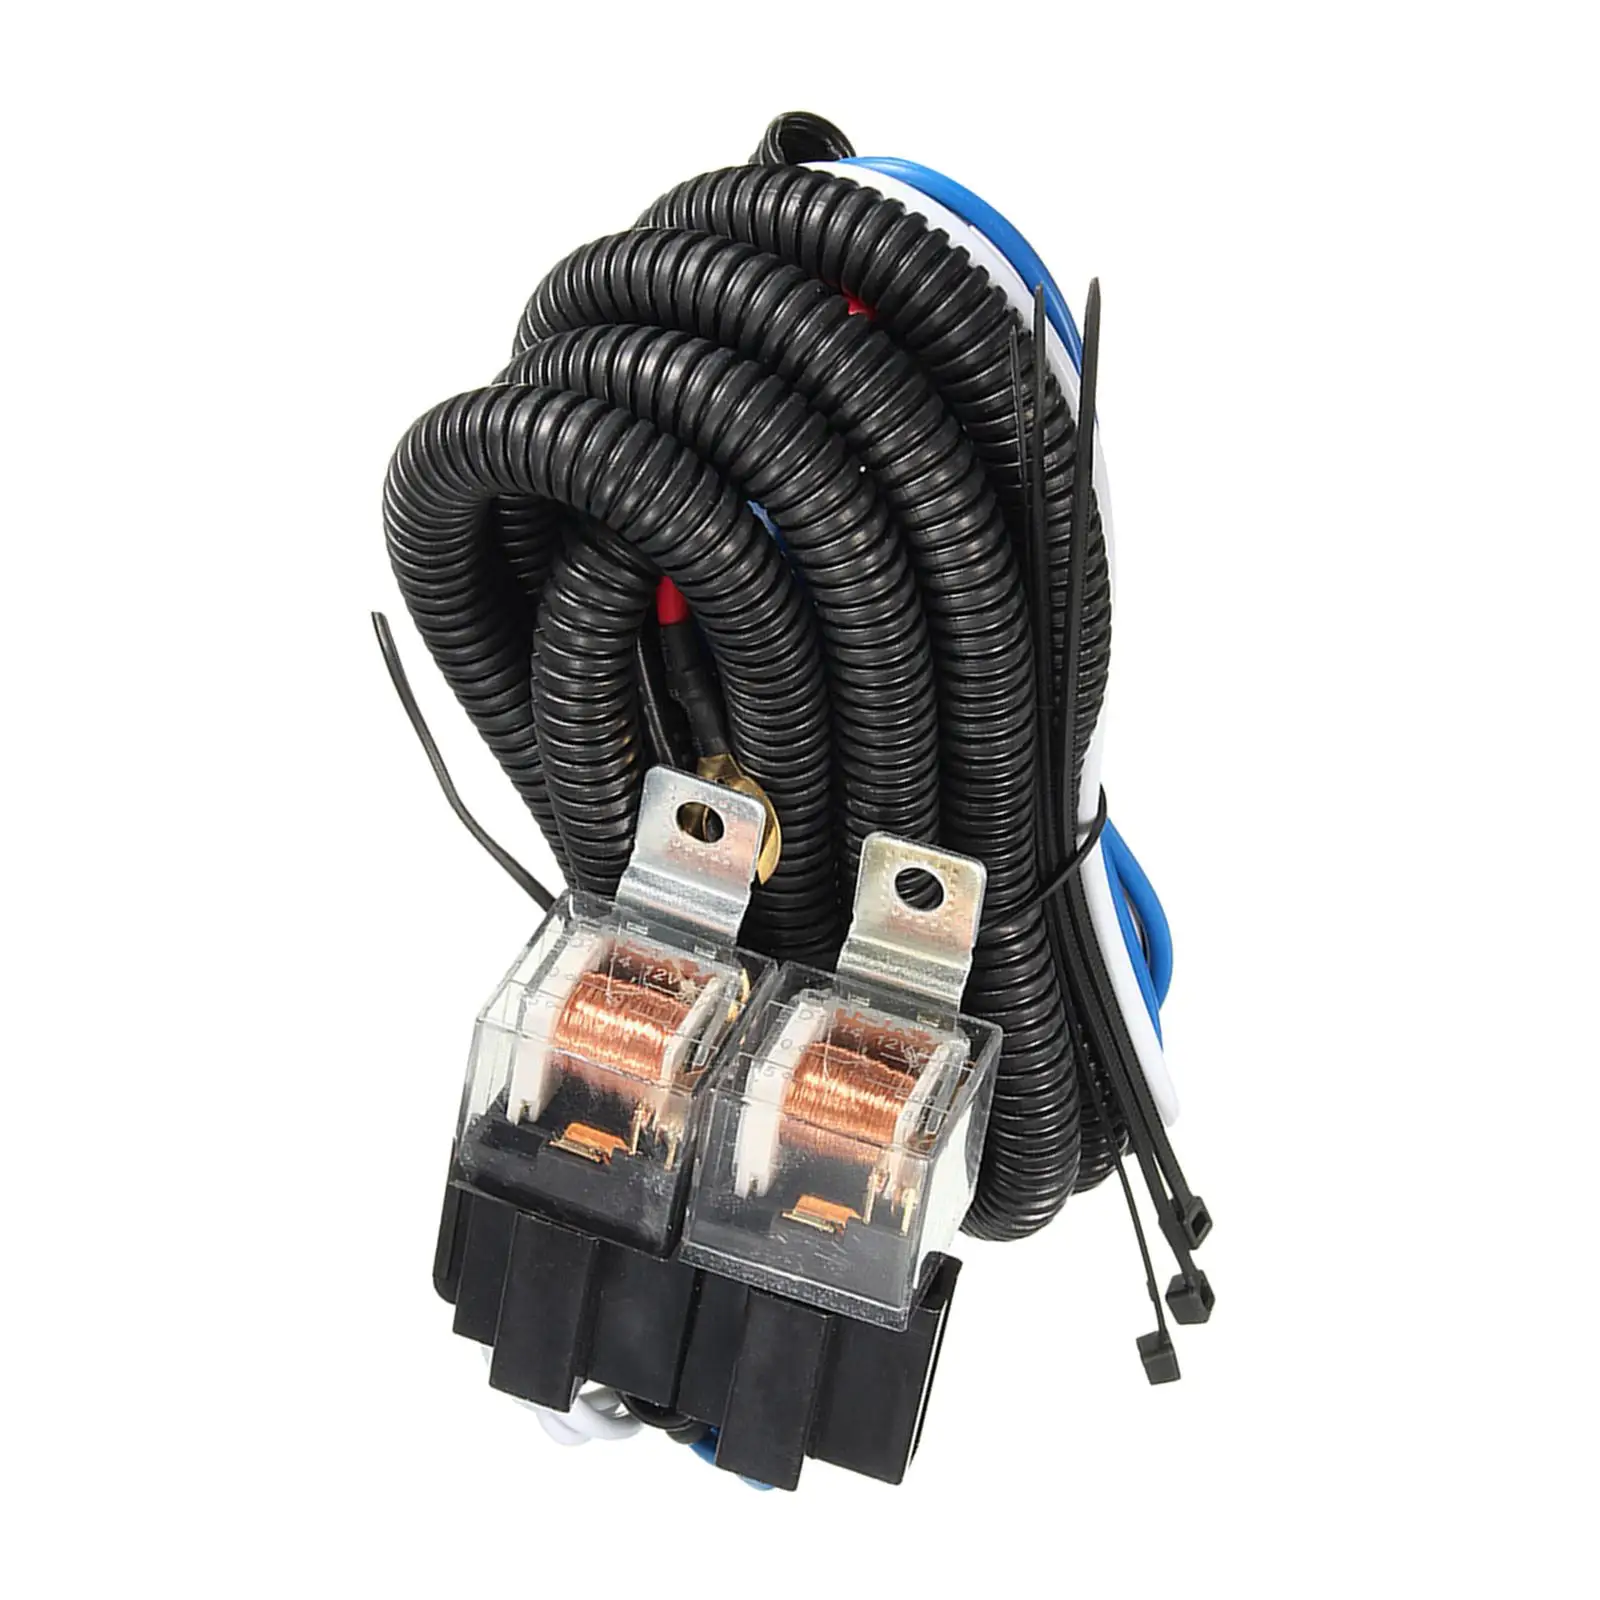 Vehicle H4 Wiring Harness Replace Durable Professional 12V Ceramic